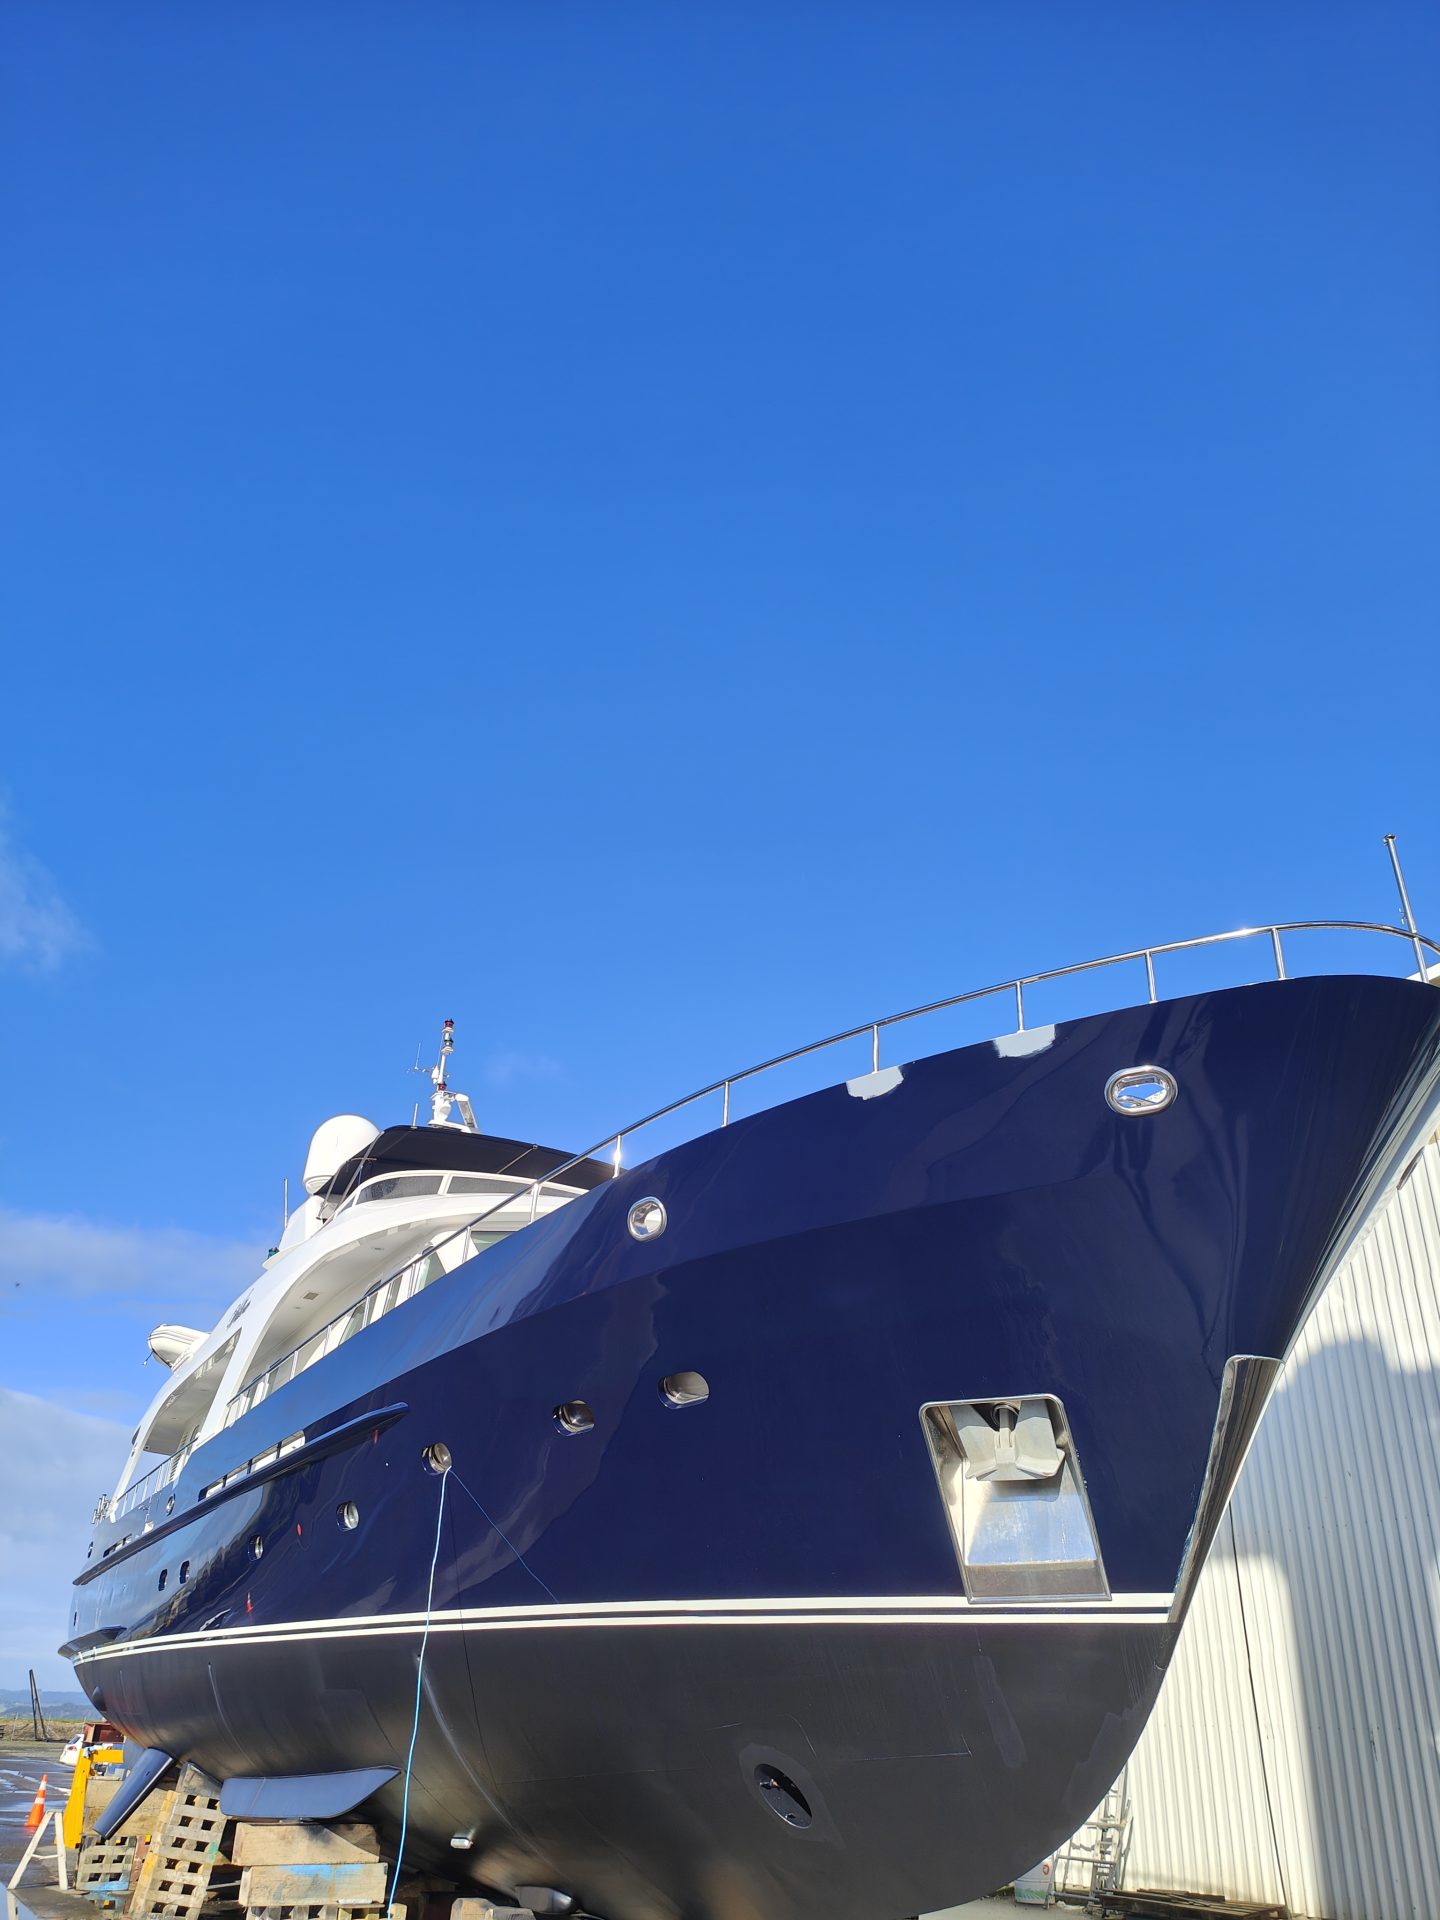 Oceania Marine’s Upgraded Shipyard at Port Whangarei Attracts Superyachts - Teaser Image